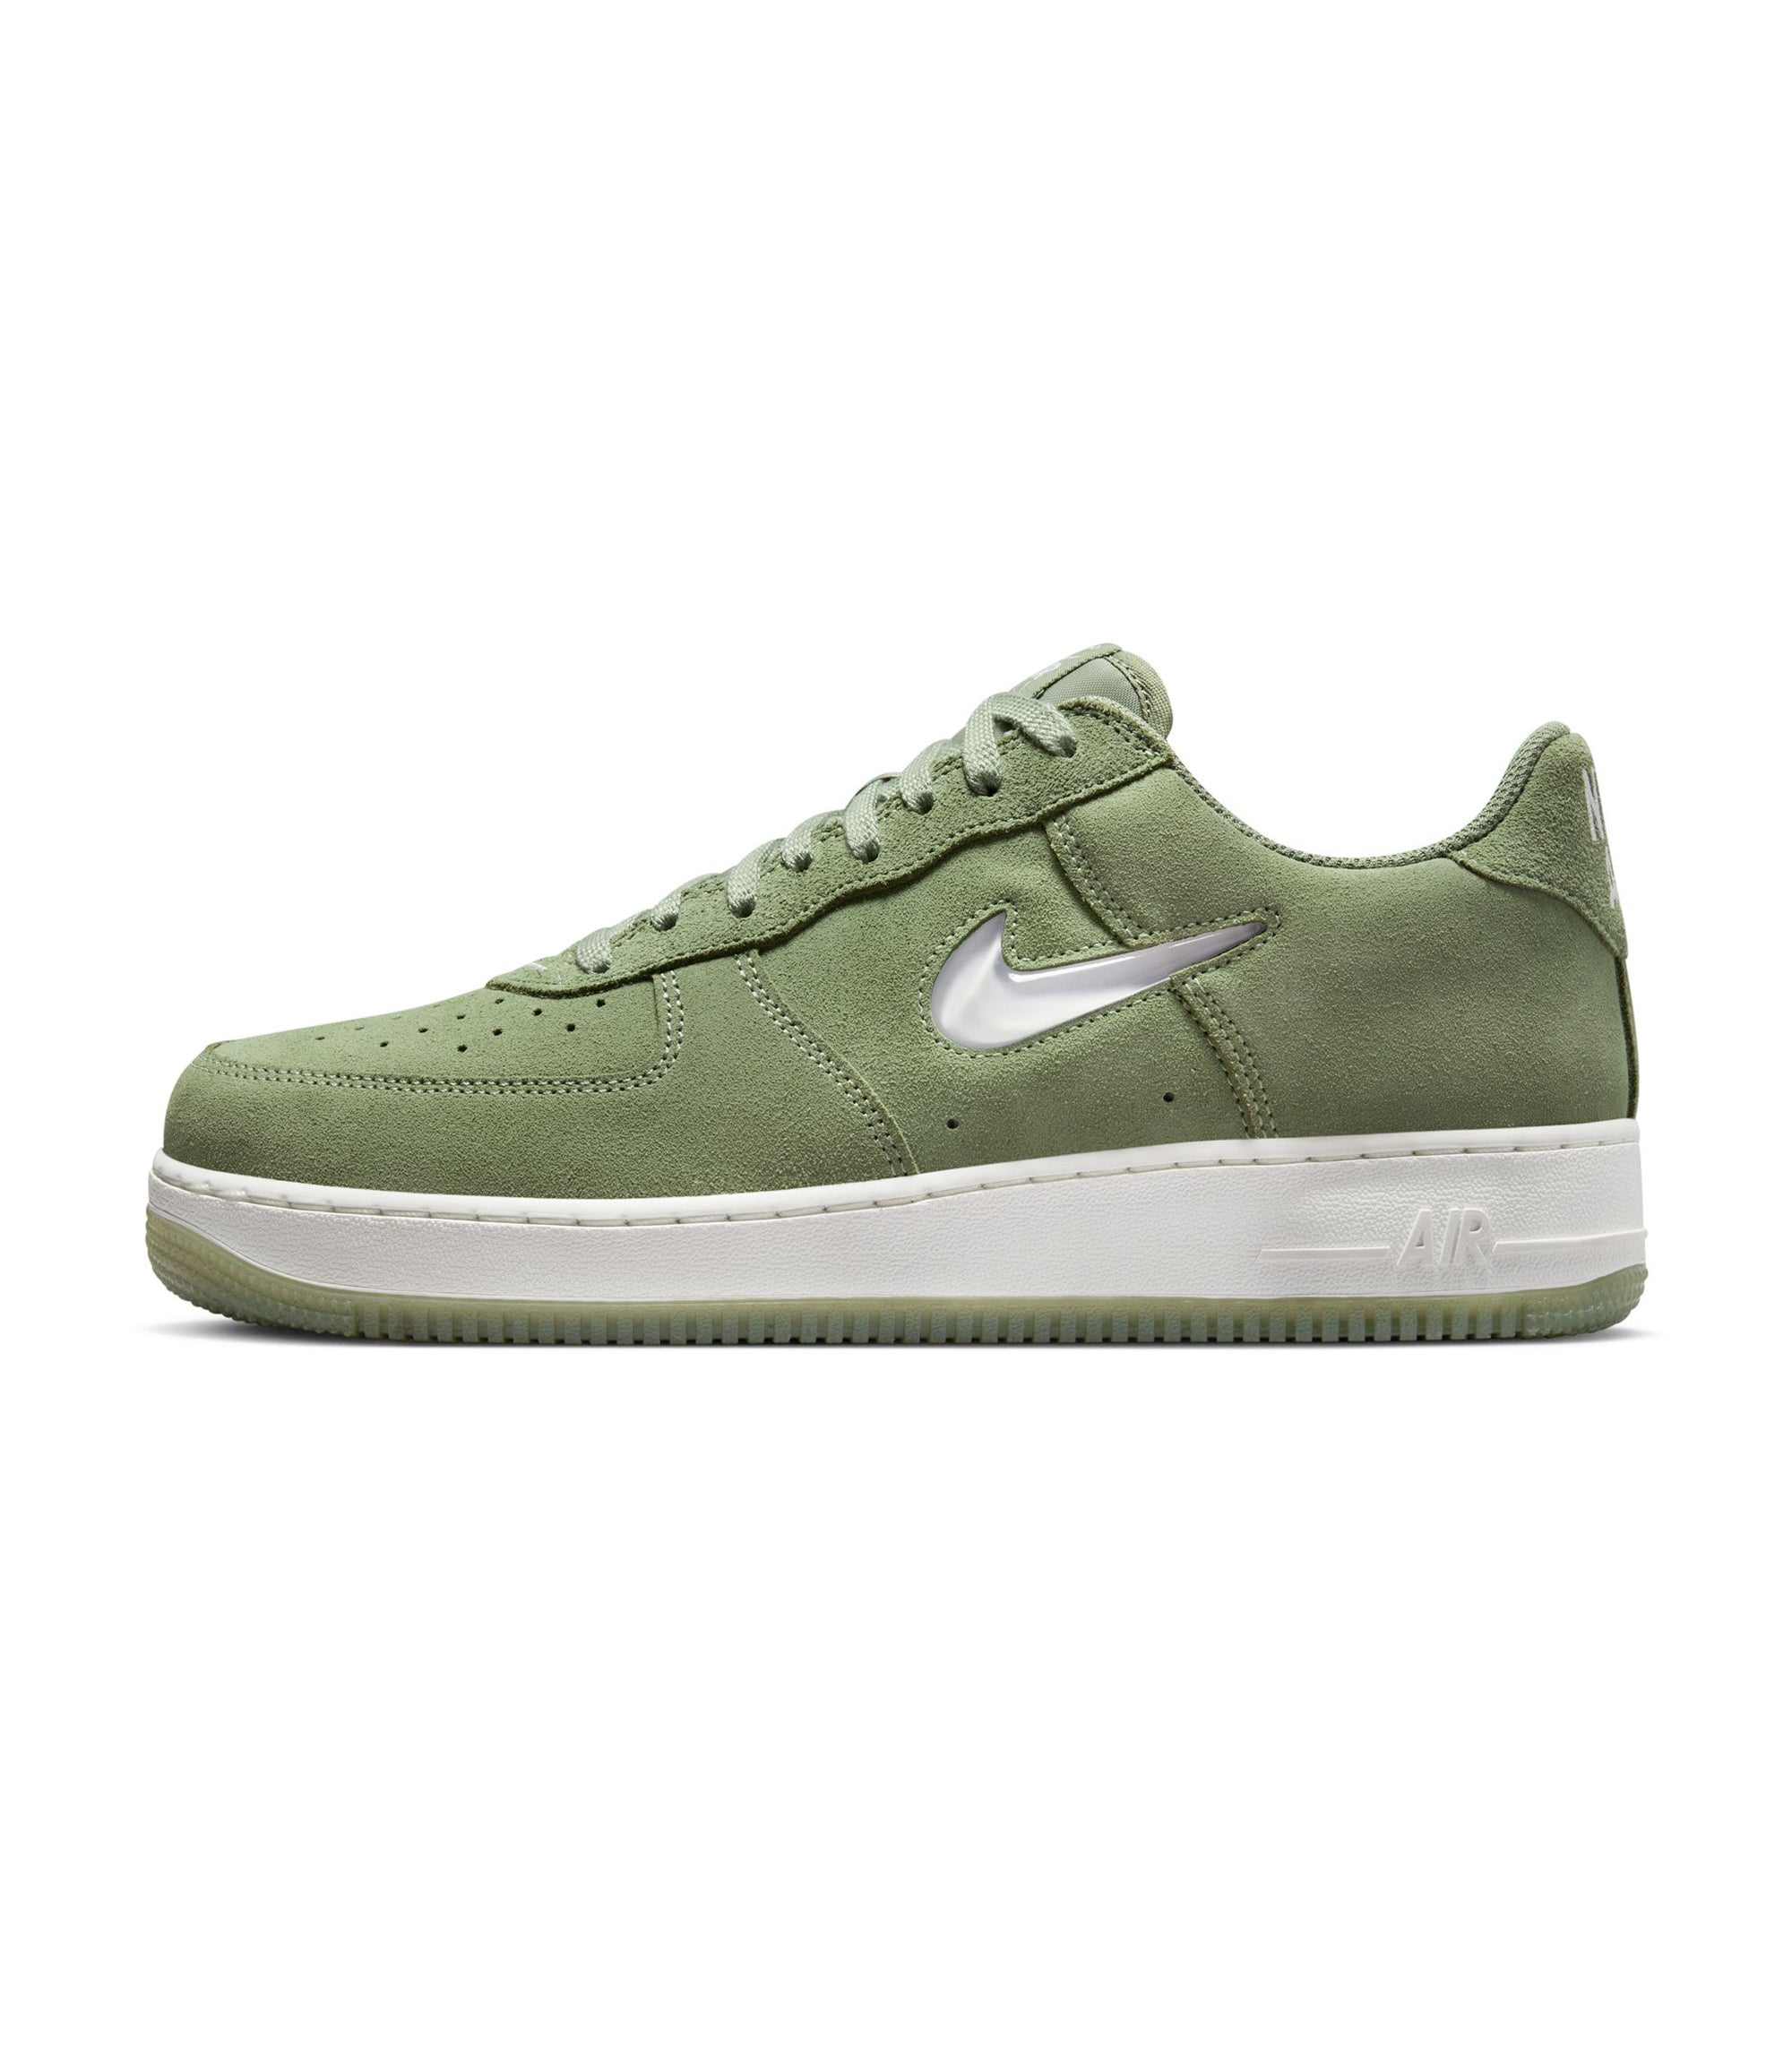 Nike Air Force 1 Low Retro - Oil Green / Summit White